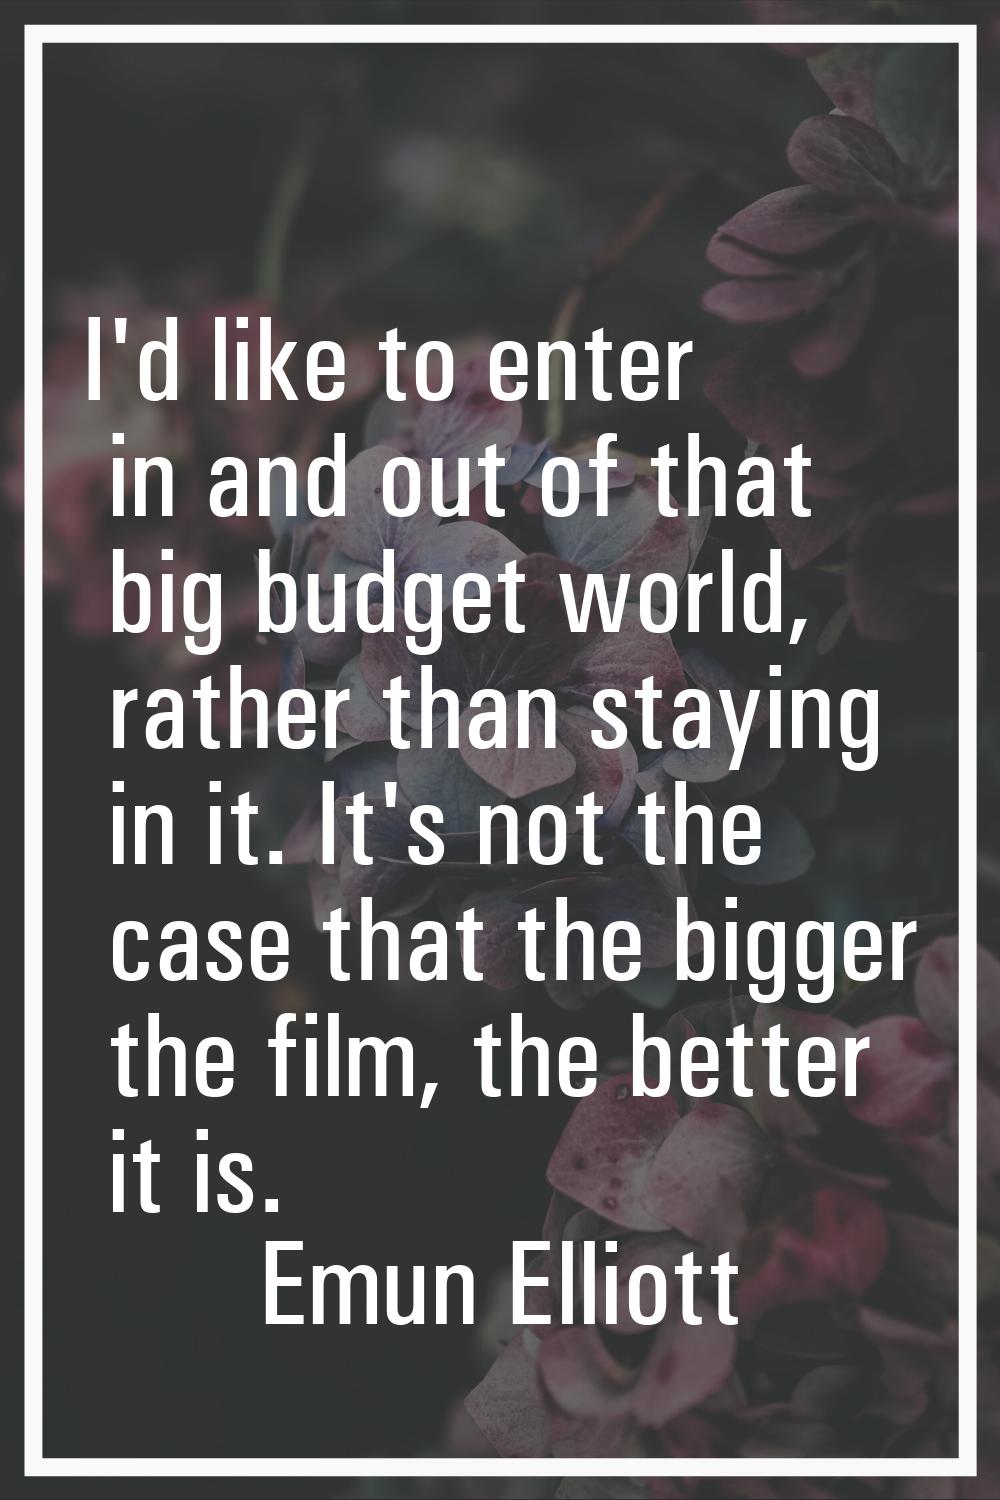 I'd like to enter in and out of that big budget world, rather than staying in it. It's not the case